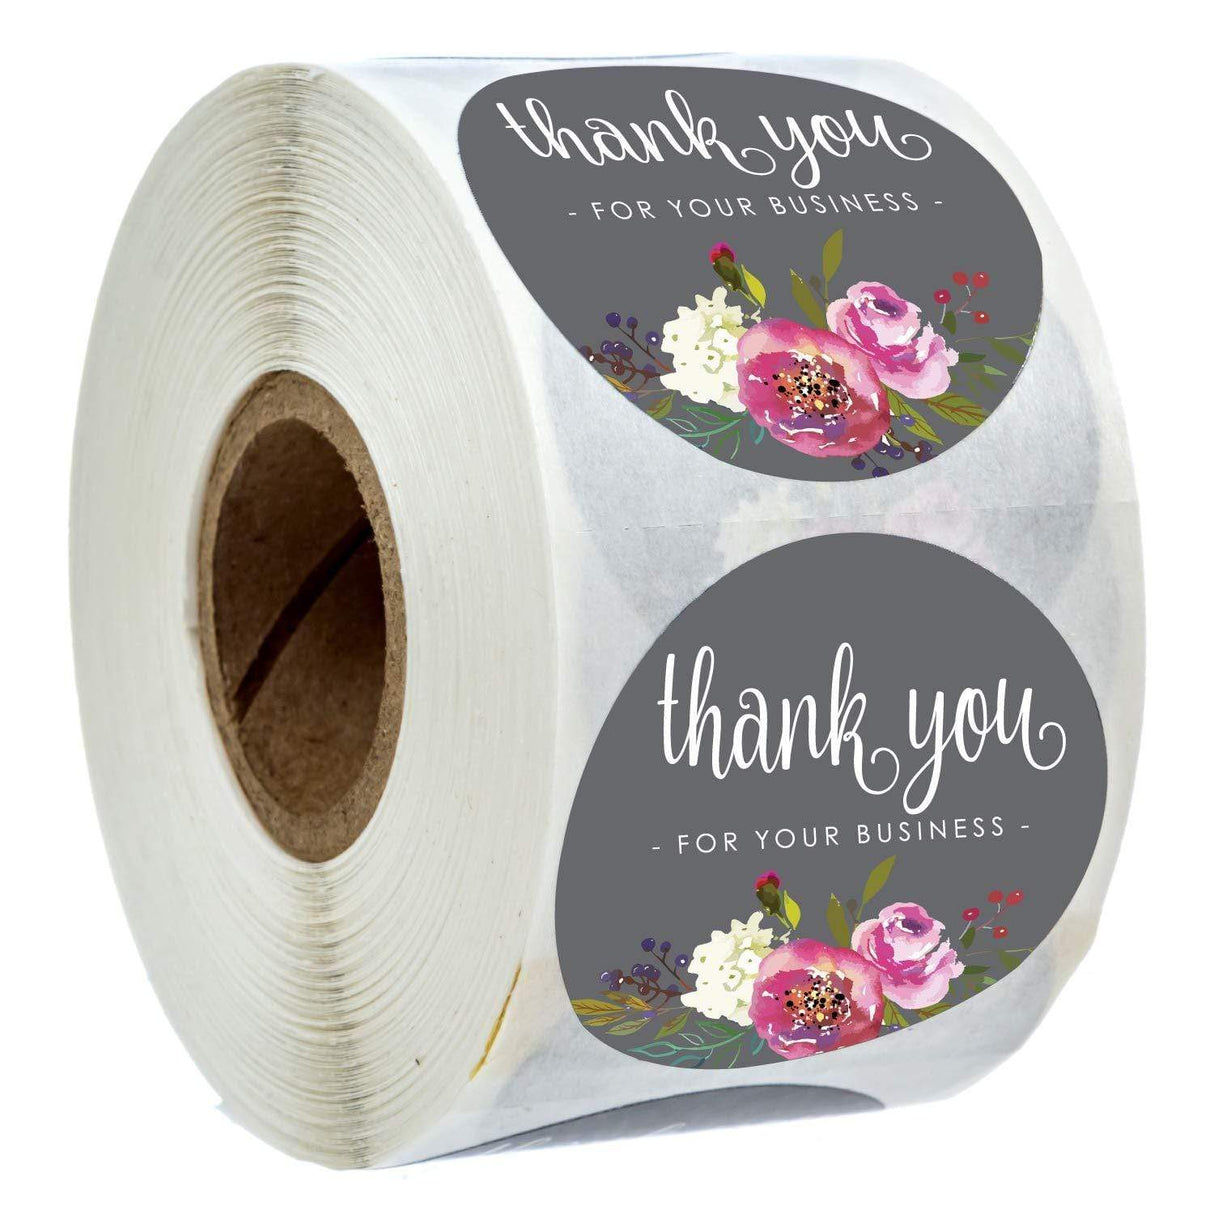 Stickers/Labels, "Thank You For Your Business", 25 pcs